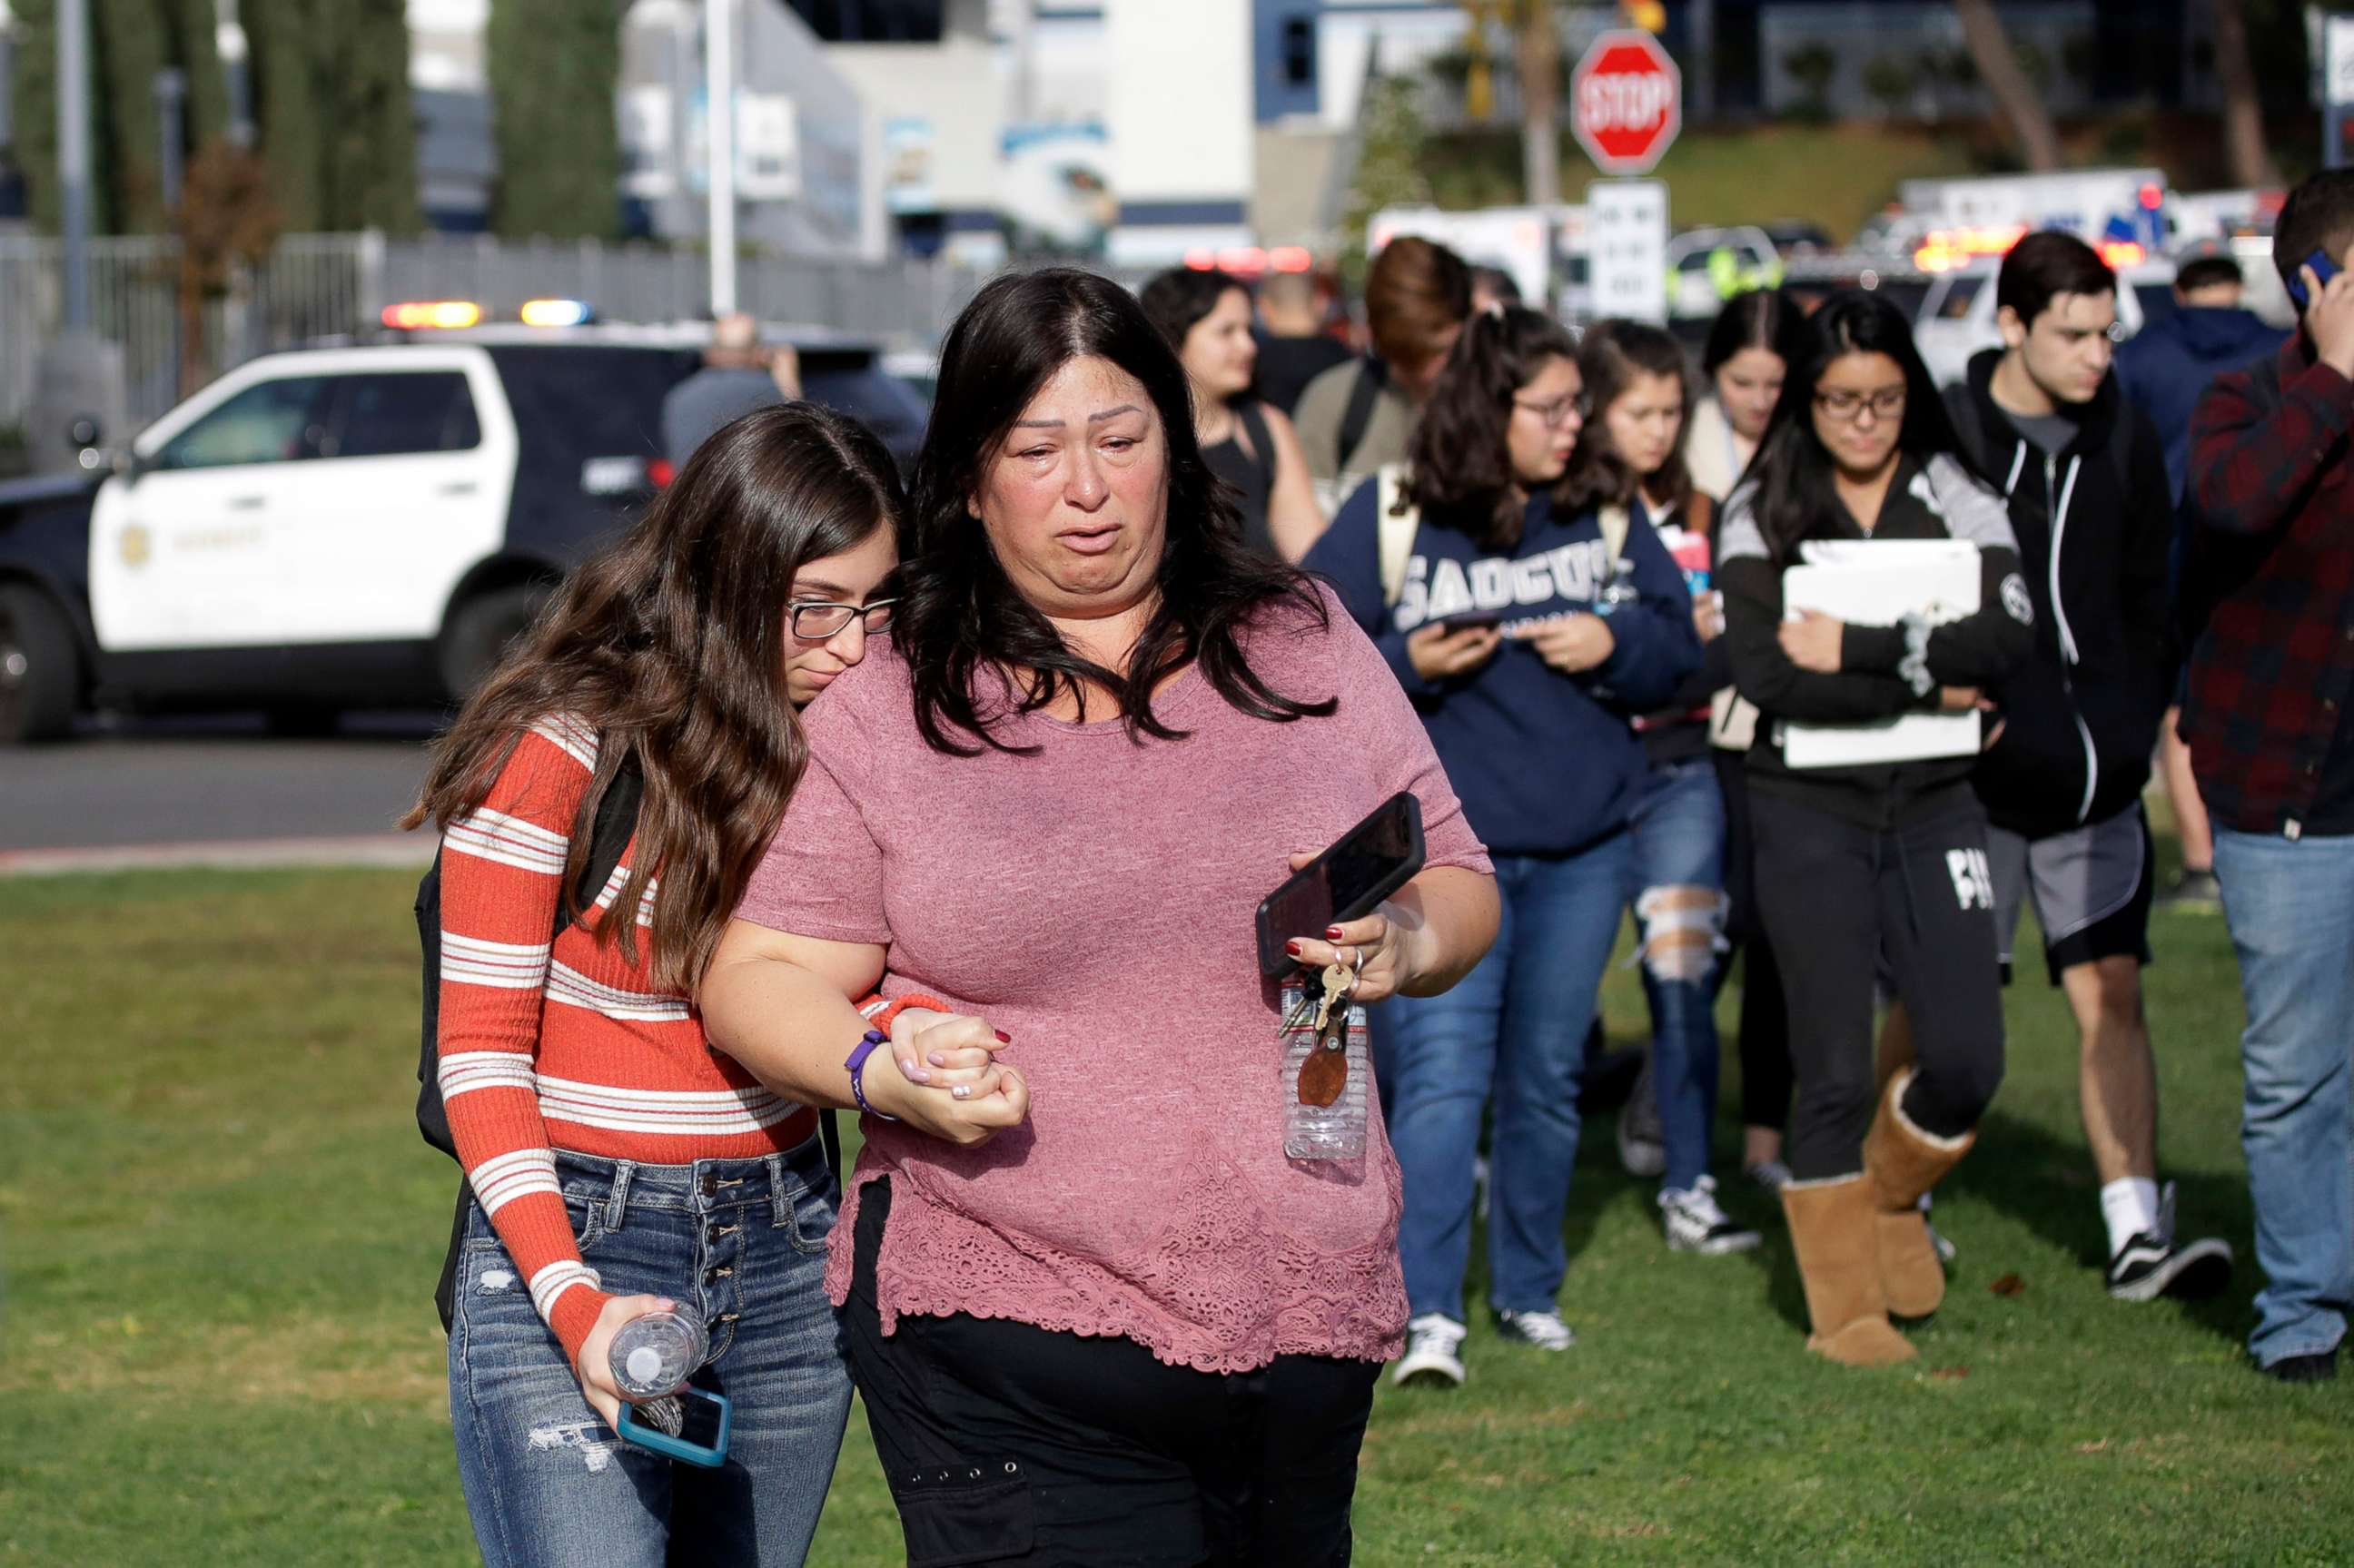 PHOTO: Students are escorted in a single file line as some parents pick them up outside of Saugus High School after reports of a shooting, Nov. 14, 2019, in Santa Clarita, Calif.